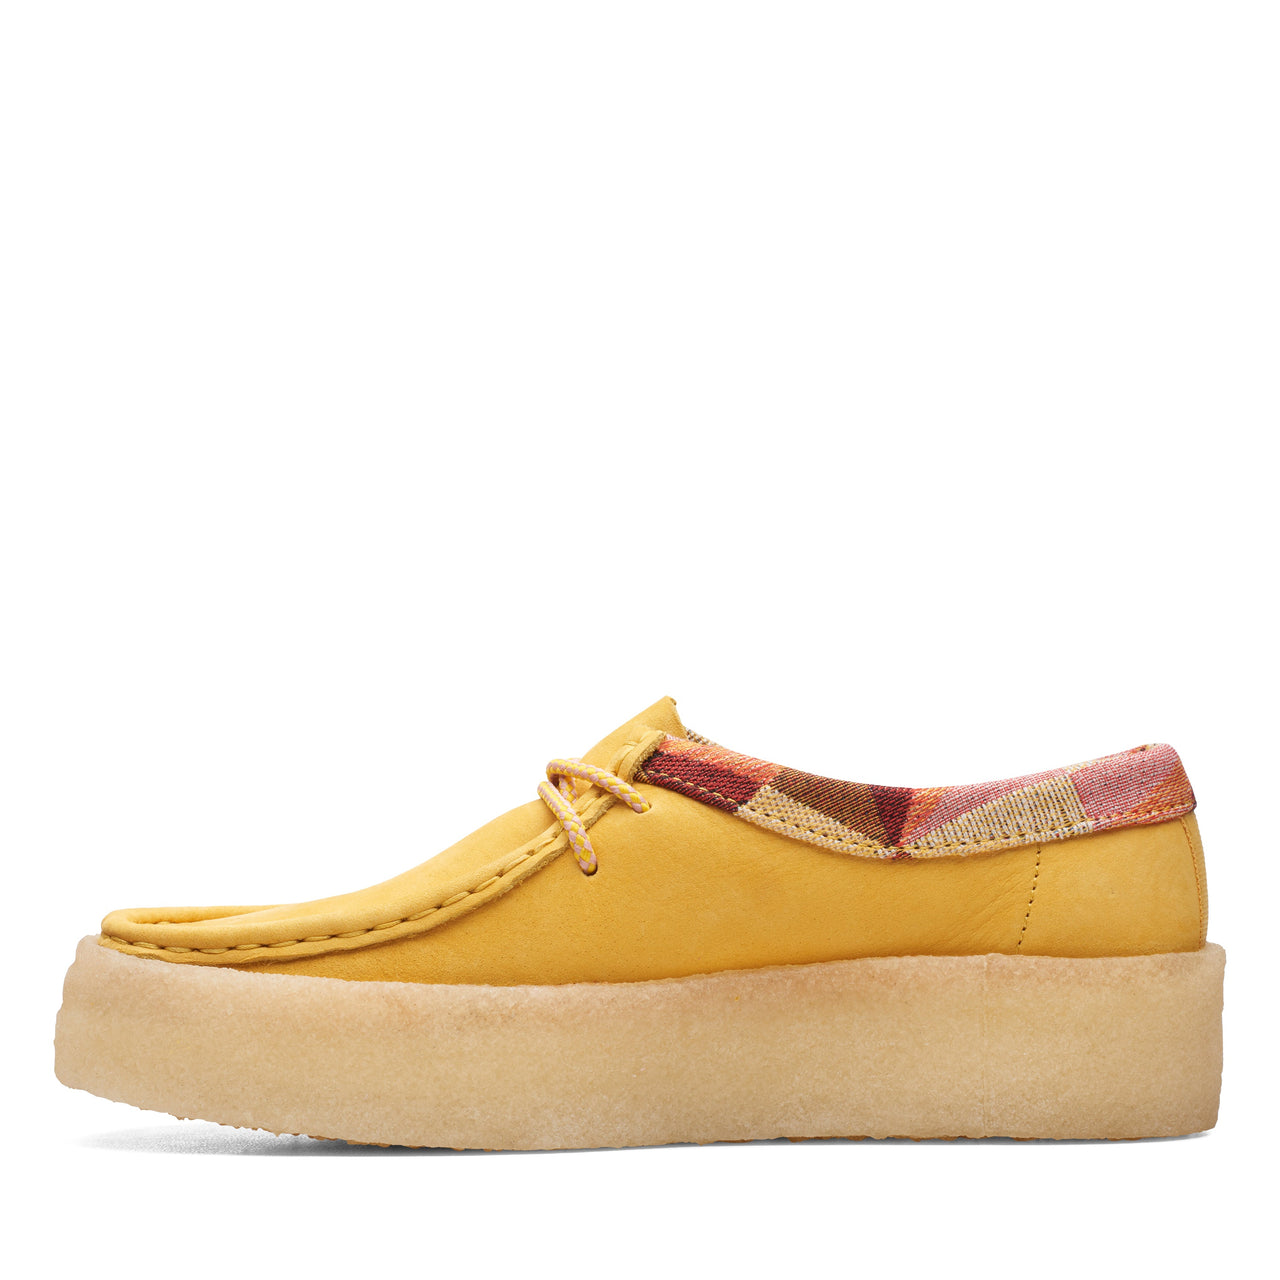  Clarks Women Wallabee Cup Shoes in yellow nubuck from top view 